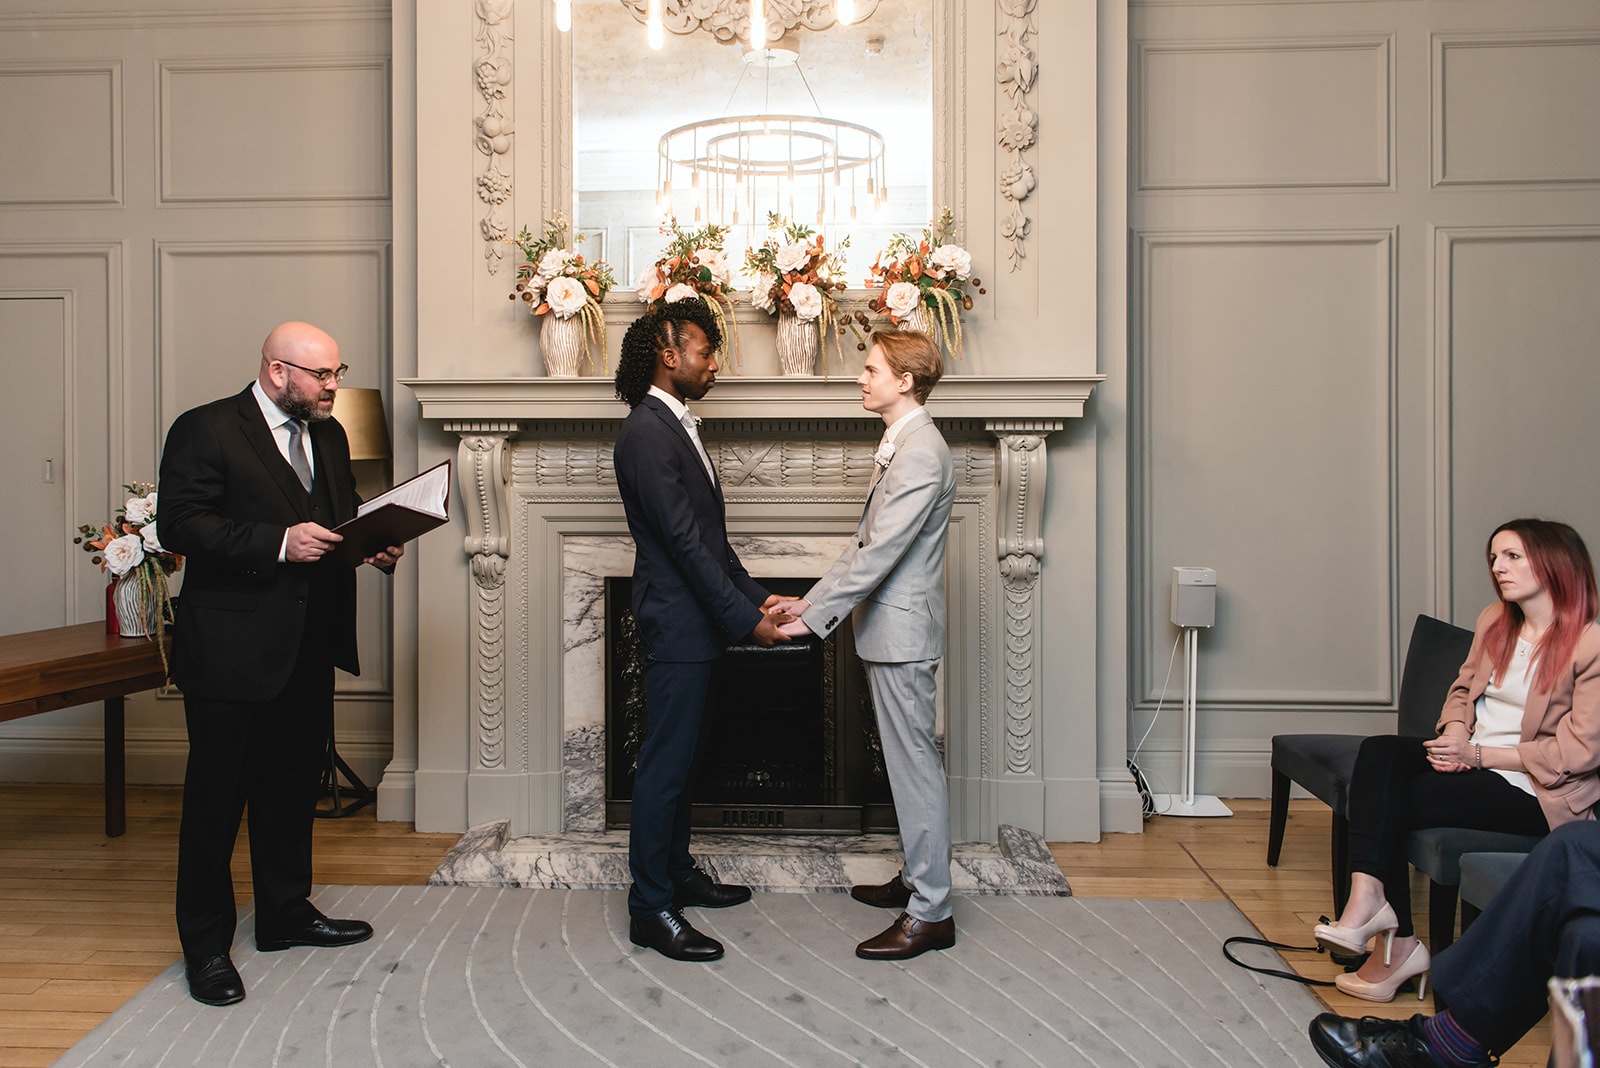 Benjamin and Ezekiel exchanging vows during the wedding ceremony in the Soho Room at Marylebone Town Hall